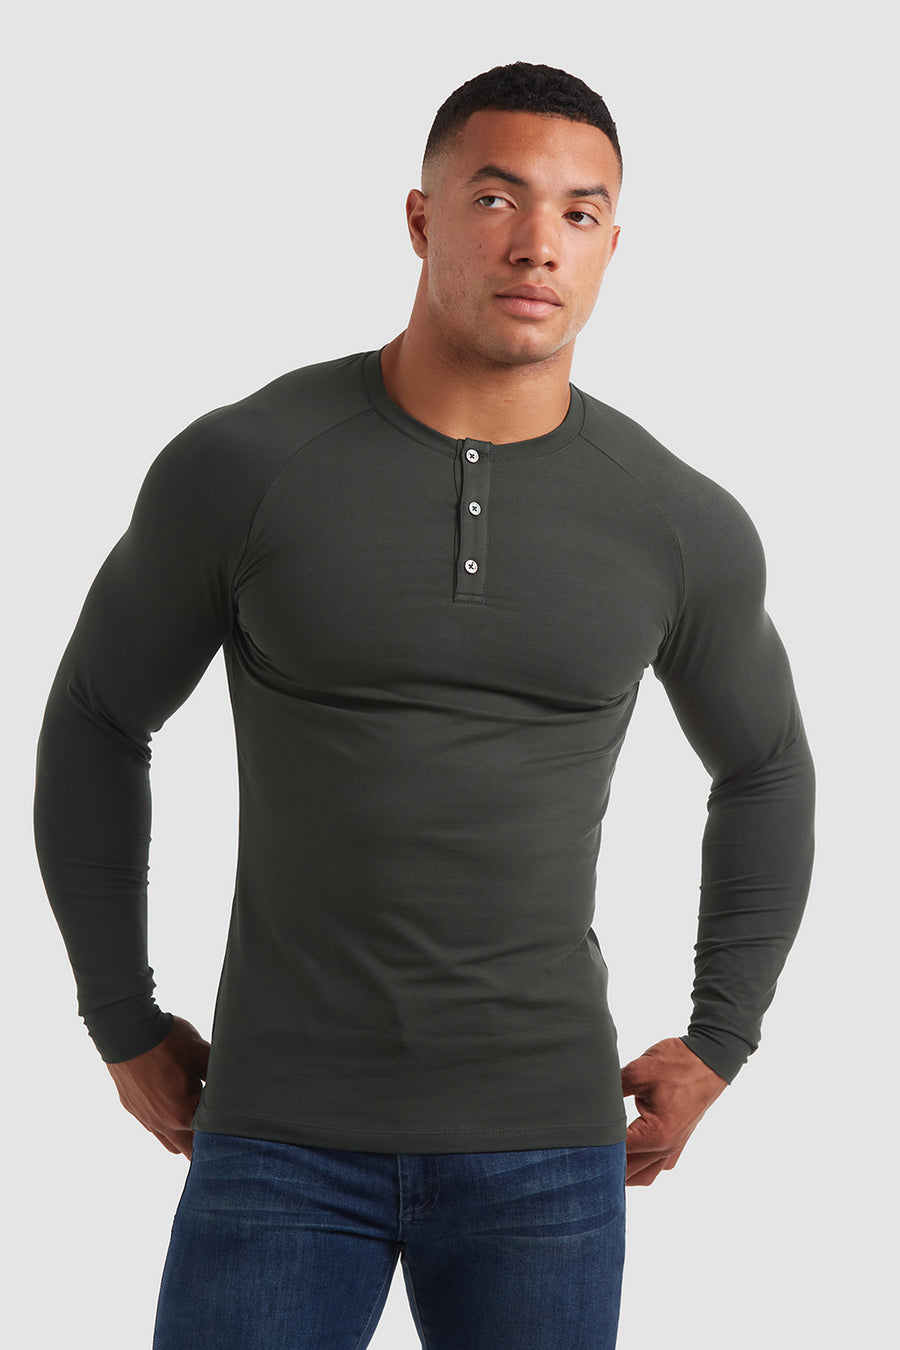 Athletic Fit T-Shirts - Tailored Athlete Page 3 - TAILORED ATHLETE - USA